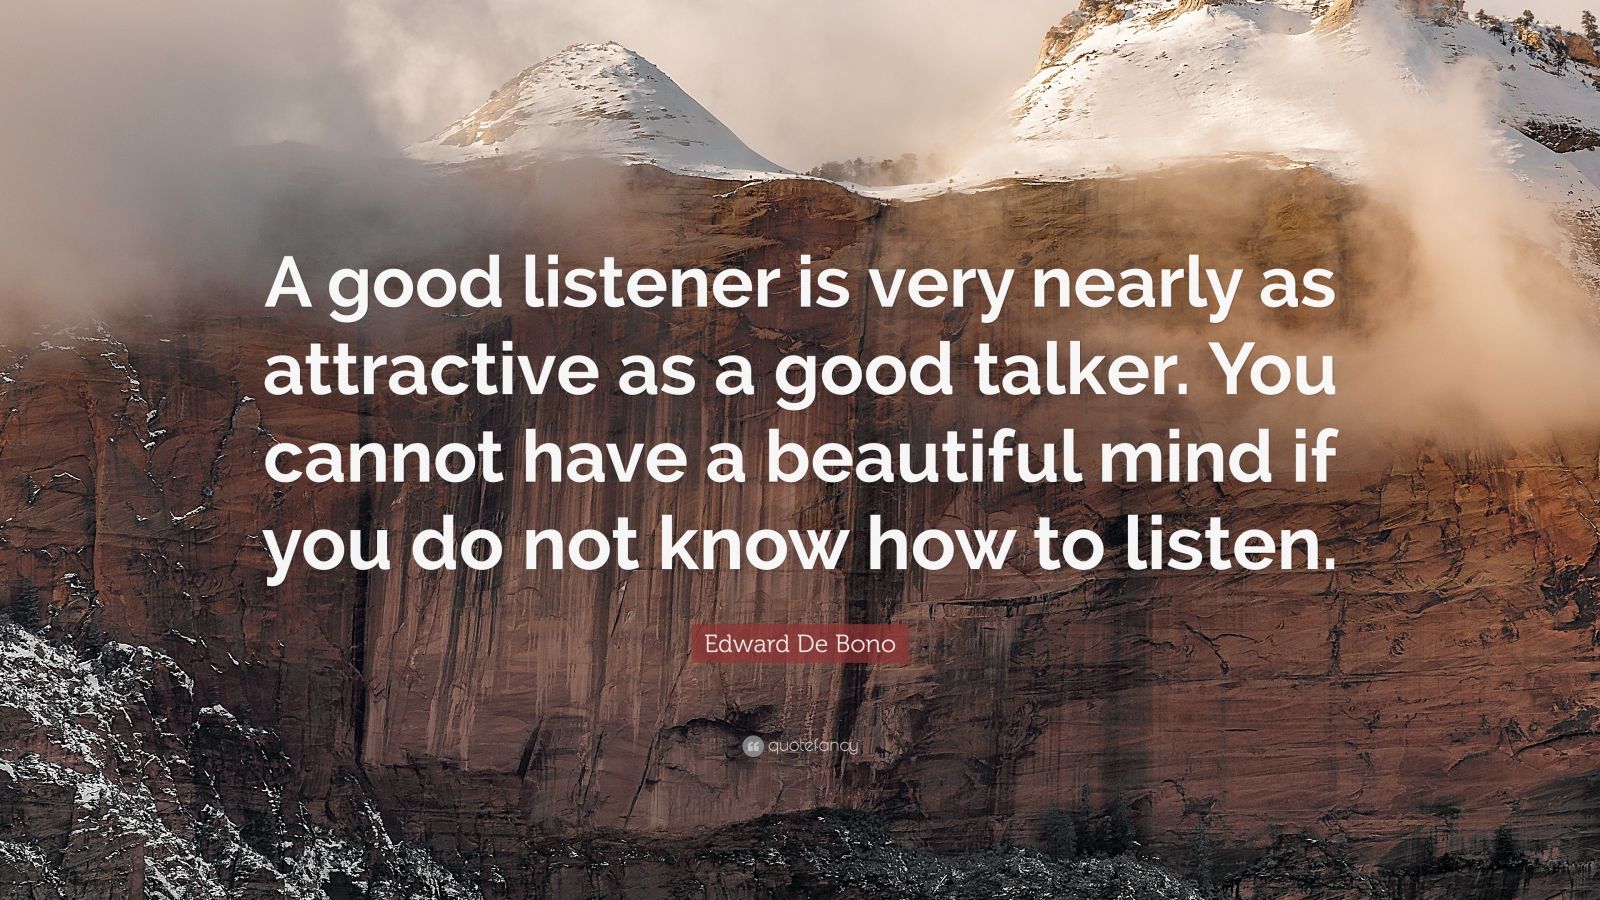 Edward De Bono Quote: “A good listener is very nearly as attractive as ...